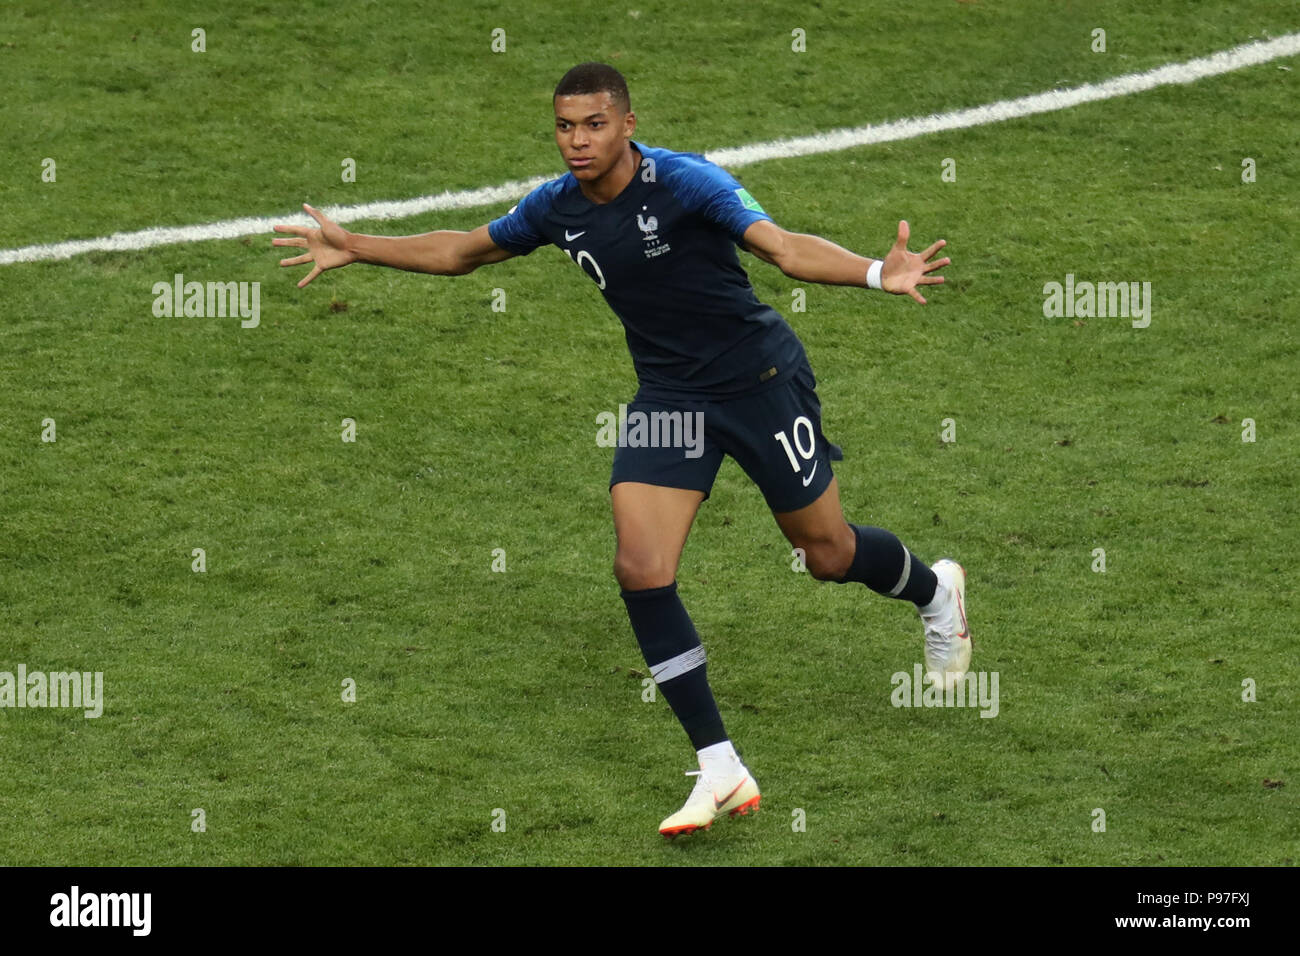 Kylian Mbappe FRANCE FRANCE V CROATIA, 2018 FIFA WORLD CUP FINAL 15 July 2018 GBC9699 France v Croatia 2018 FIFA World Cup Russia, Final STRICTLY EDITORIAL USE ONLY. If The Player/Players Depicted In This Image Is/Are Playing For An English Club Or The England National Team. Then This Image May Only Be Used For Editorial Purposes. No Commercial Use. The Following Usages Are Also Restricted EVEN IF IN AN EDITORIAL CONTEXT: Use in conjuction with, or part of, any unauthorized audio, video, data, fixture lists, club/league logos, Betting, Games or any 'live' services. Also R Stock Photo